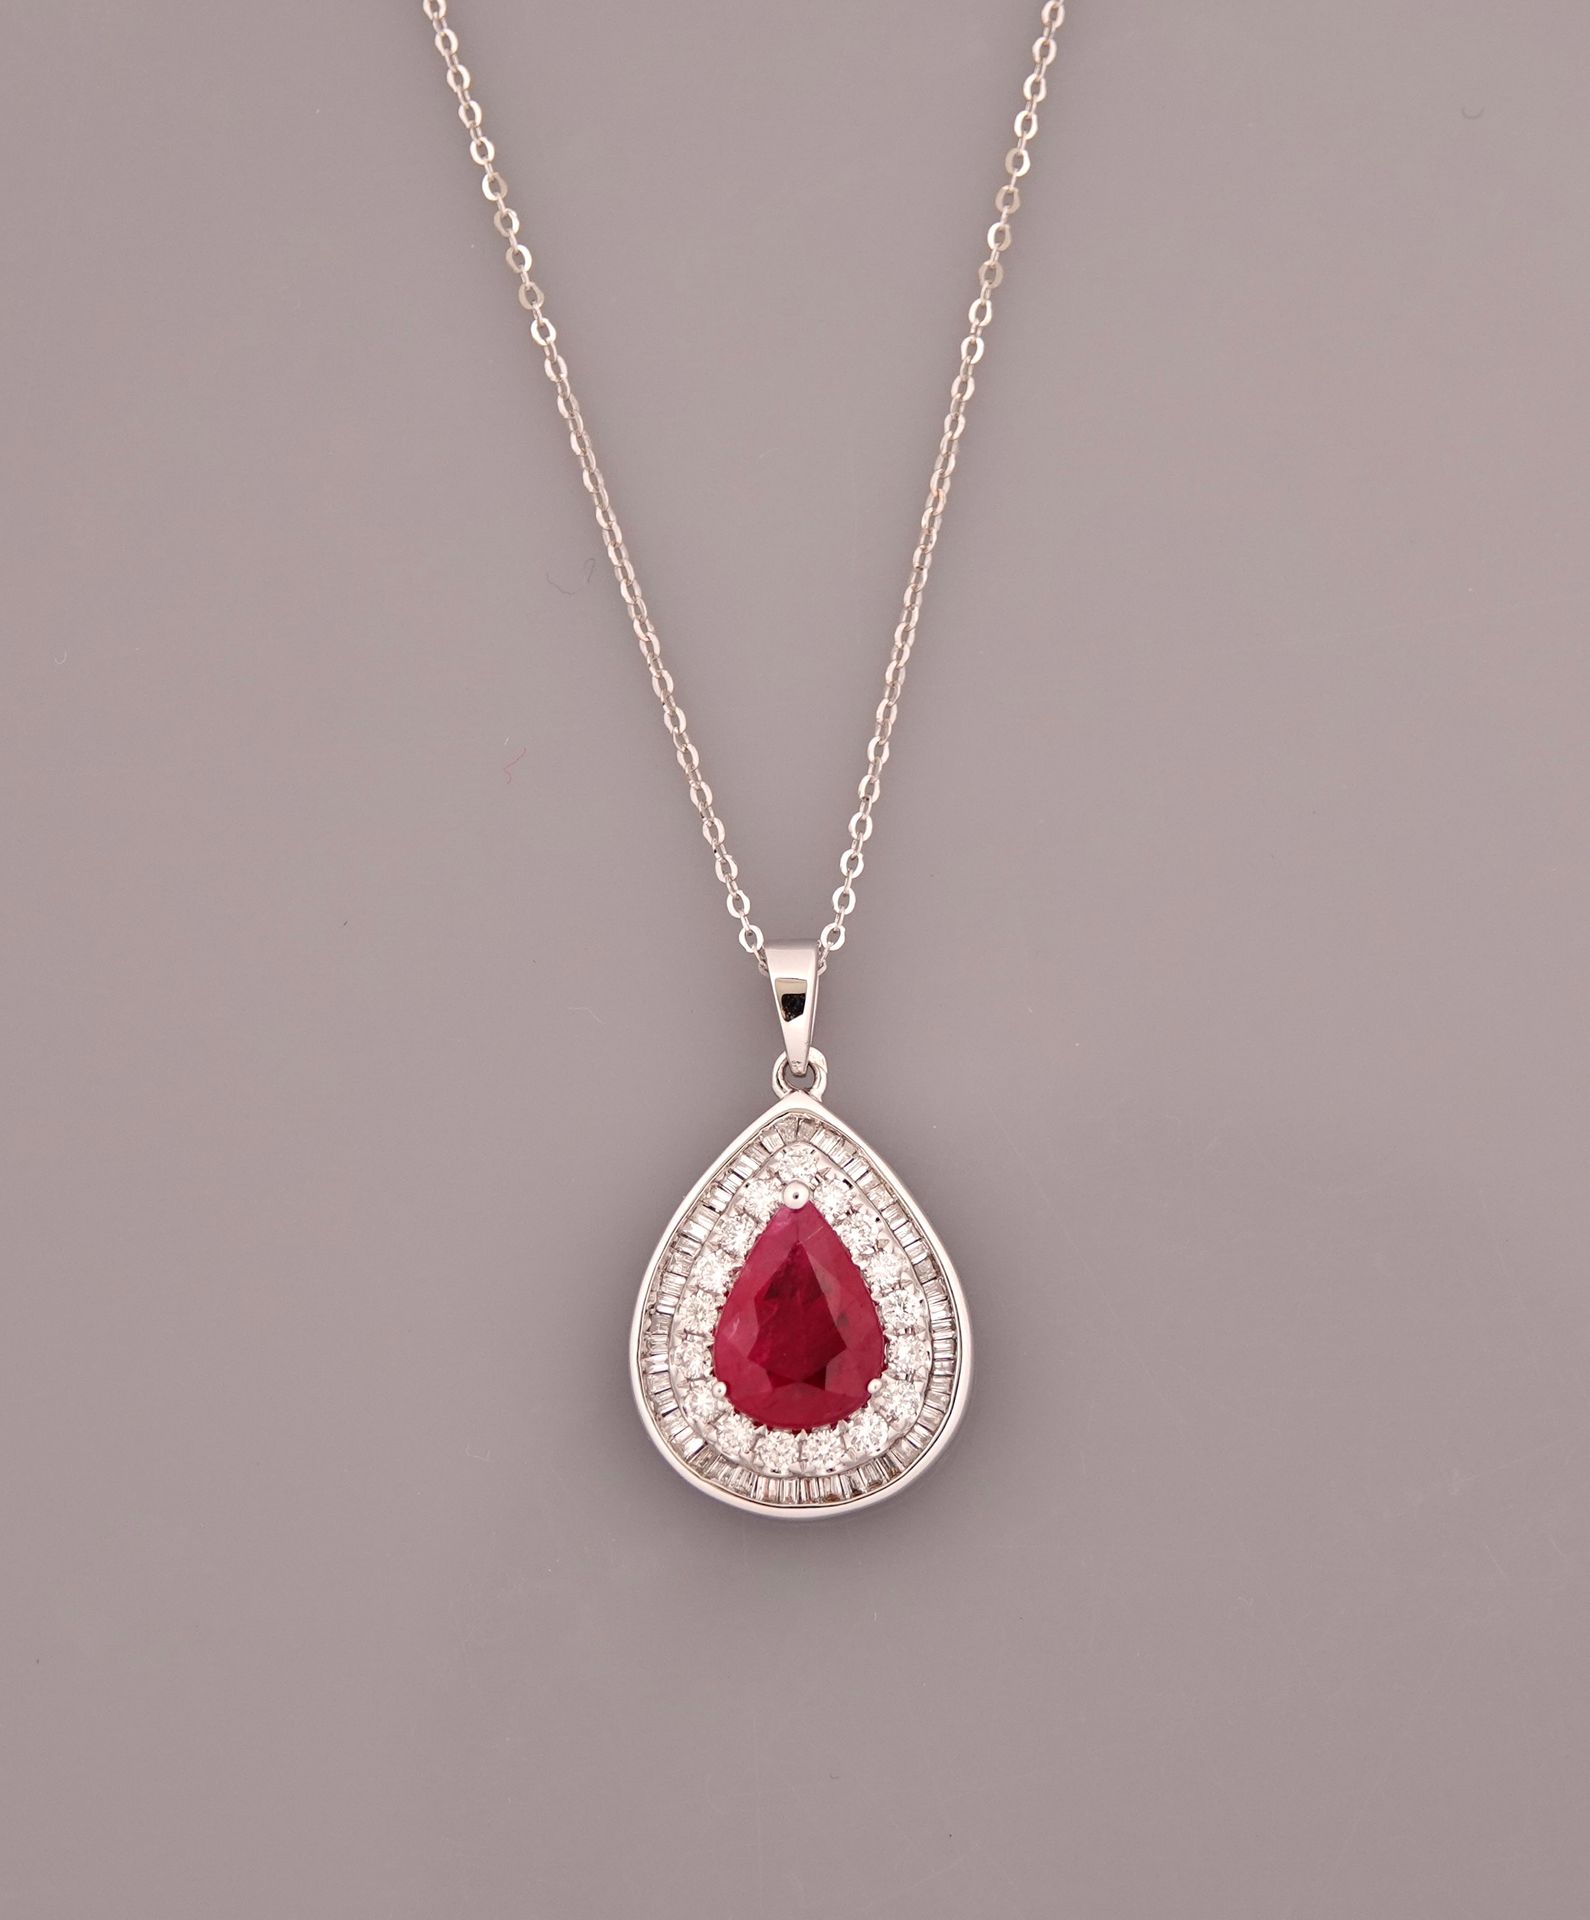 Null Chain and pendant in white gold, 750 MM, adorned with a pear-cut ruby weigh&hellip;